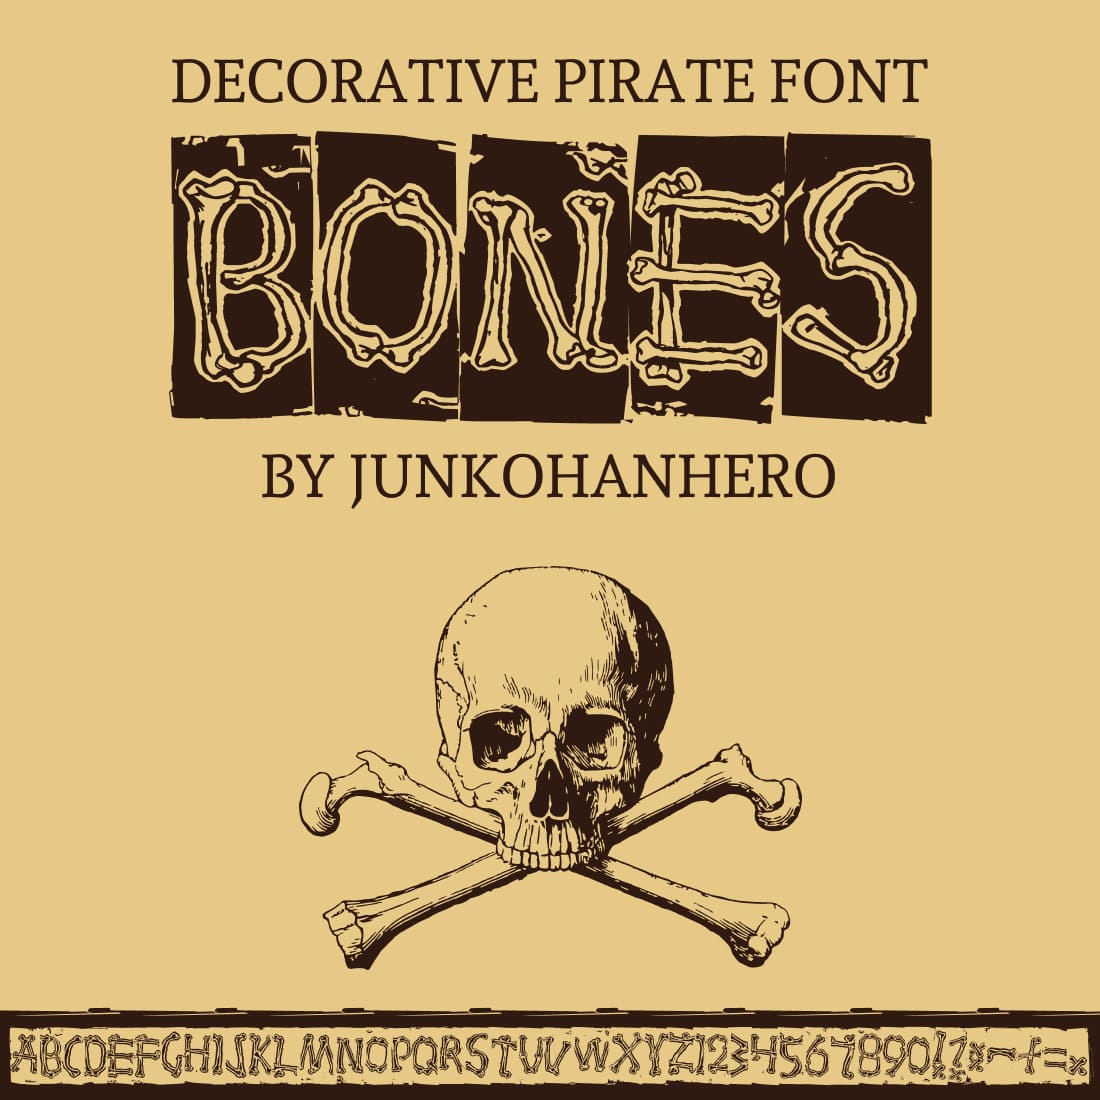 The skull and bones are the main elements of the font.